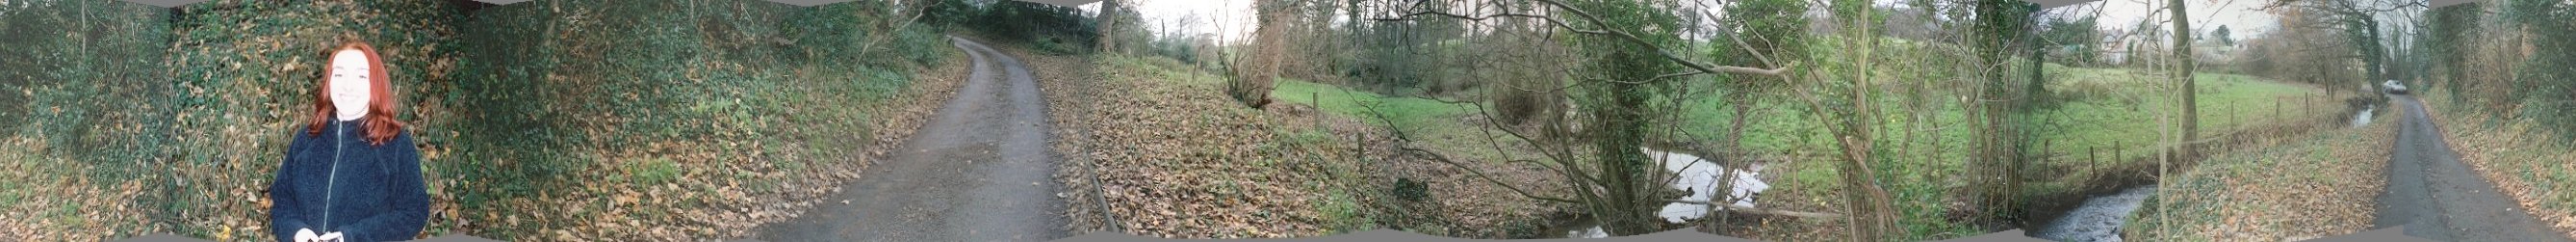 360 degree panorama showing the road, stream